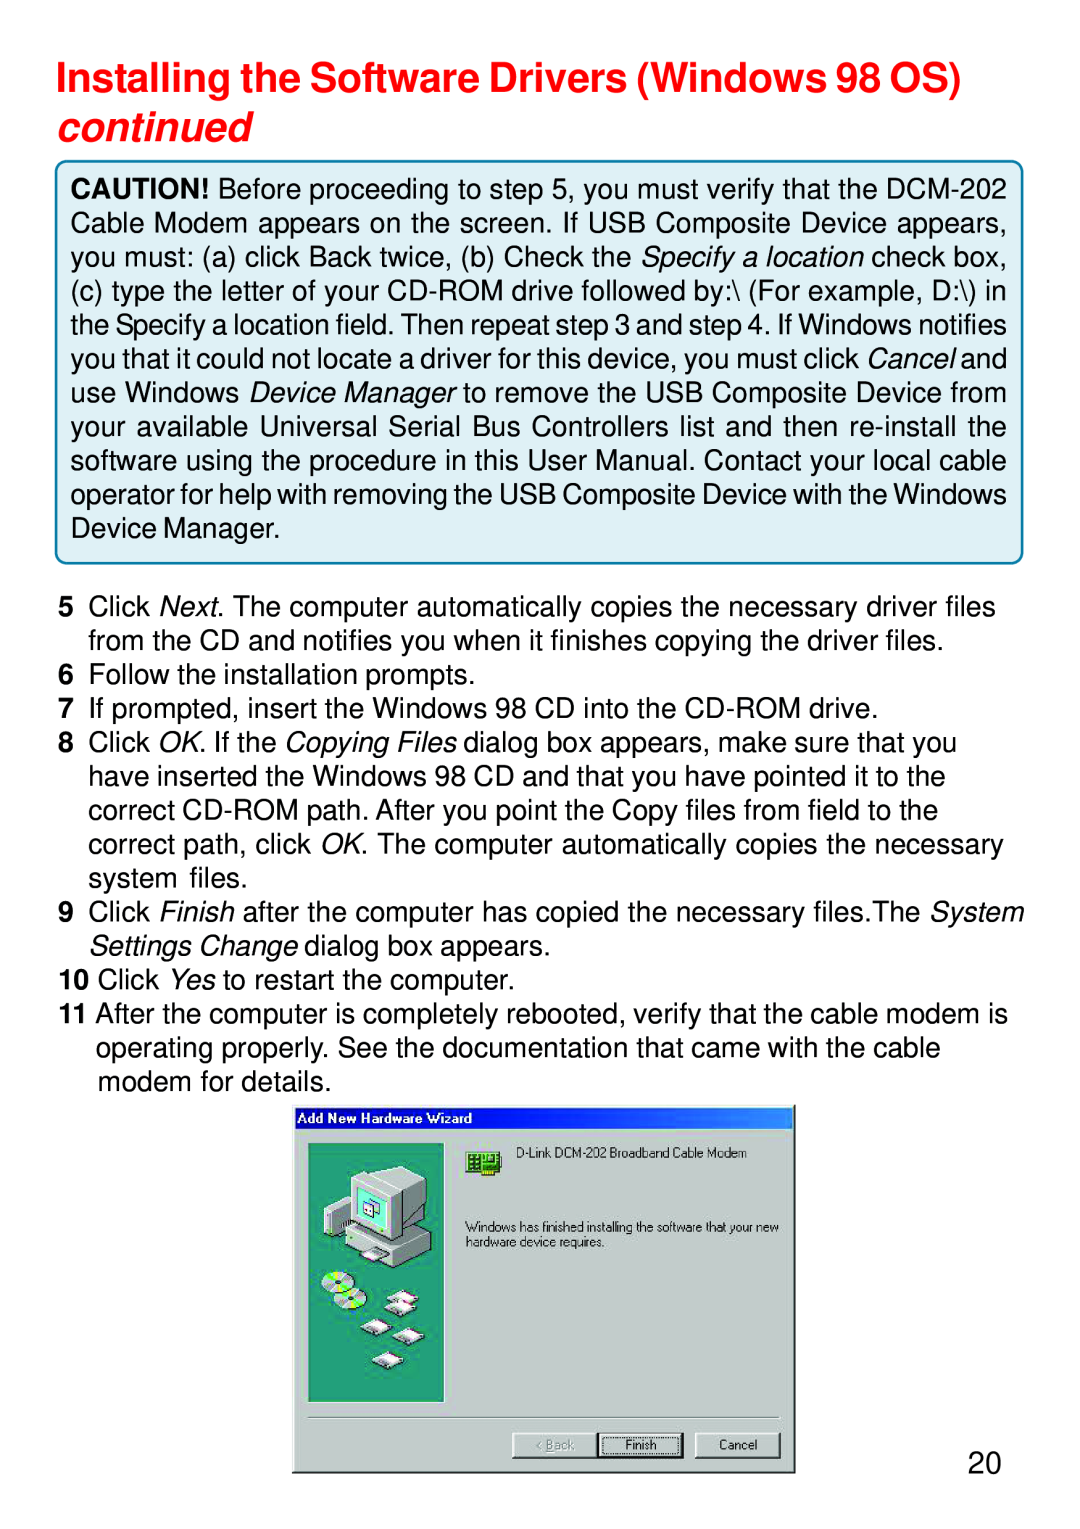 D-Link DCM-202 manual Installing the Software Drivers Windows 98 OS continued, Follow the installation prompts 